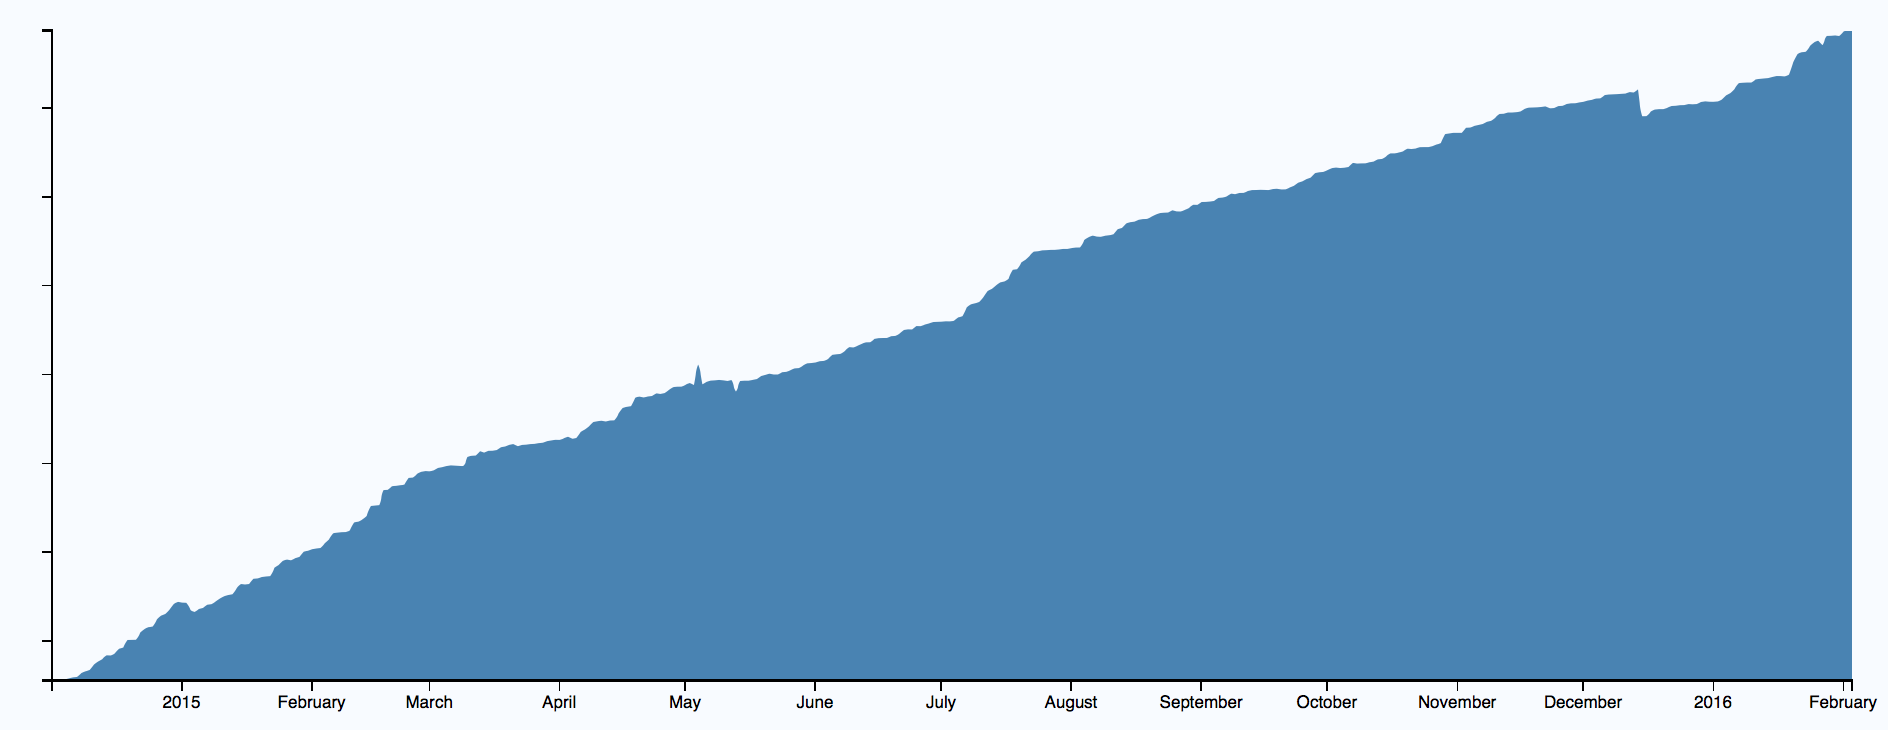 The growth of your codebase